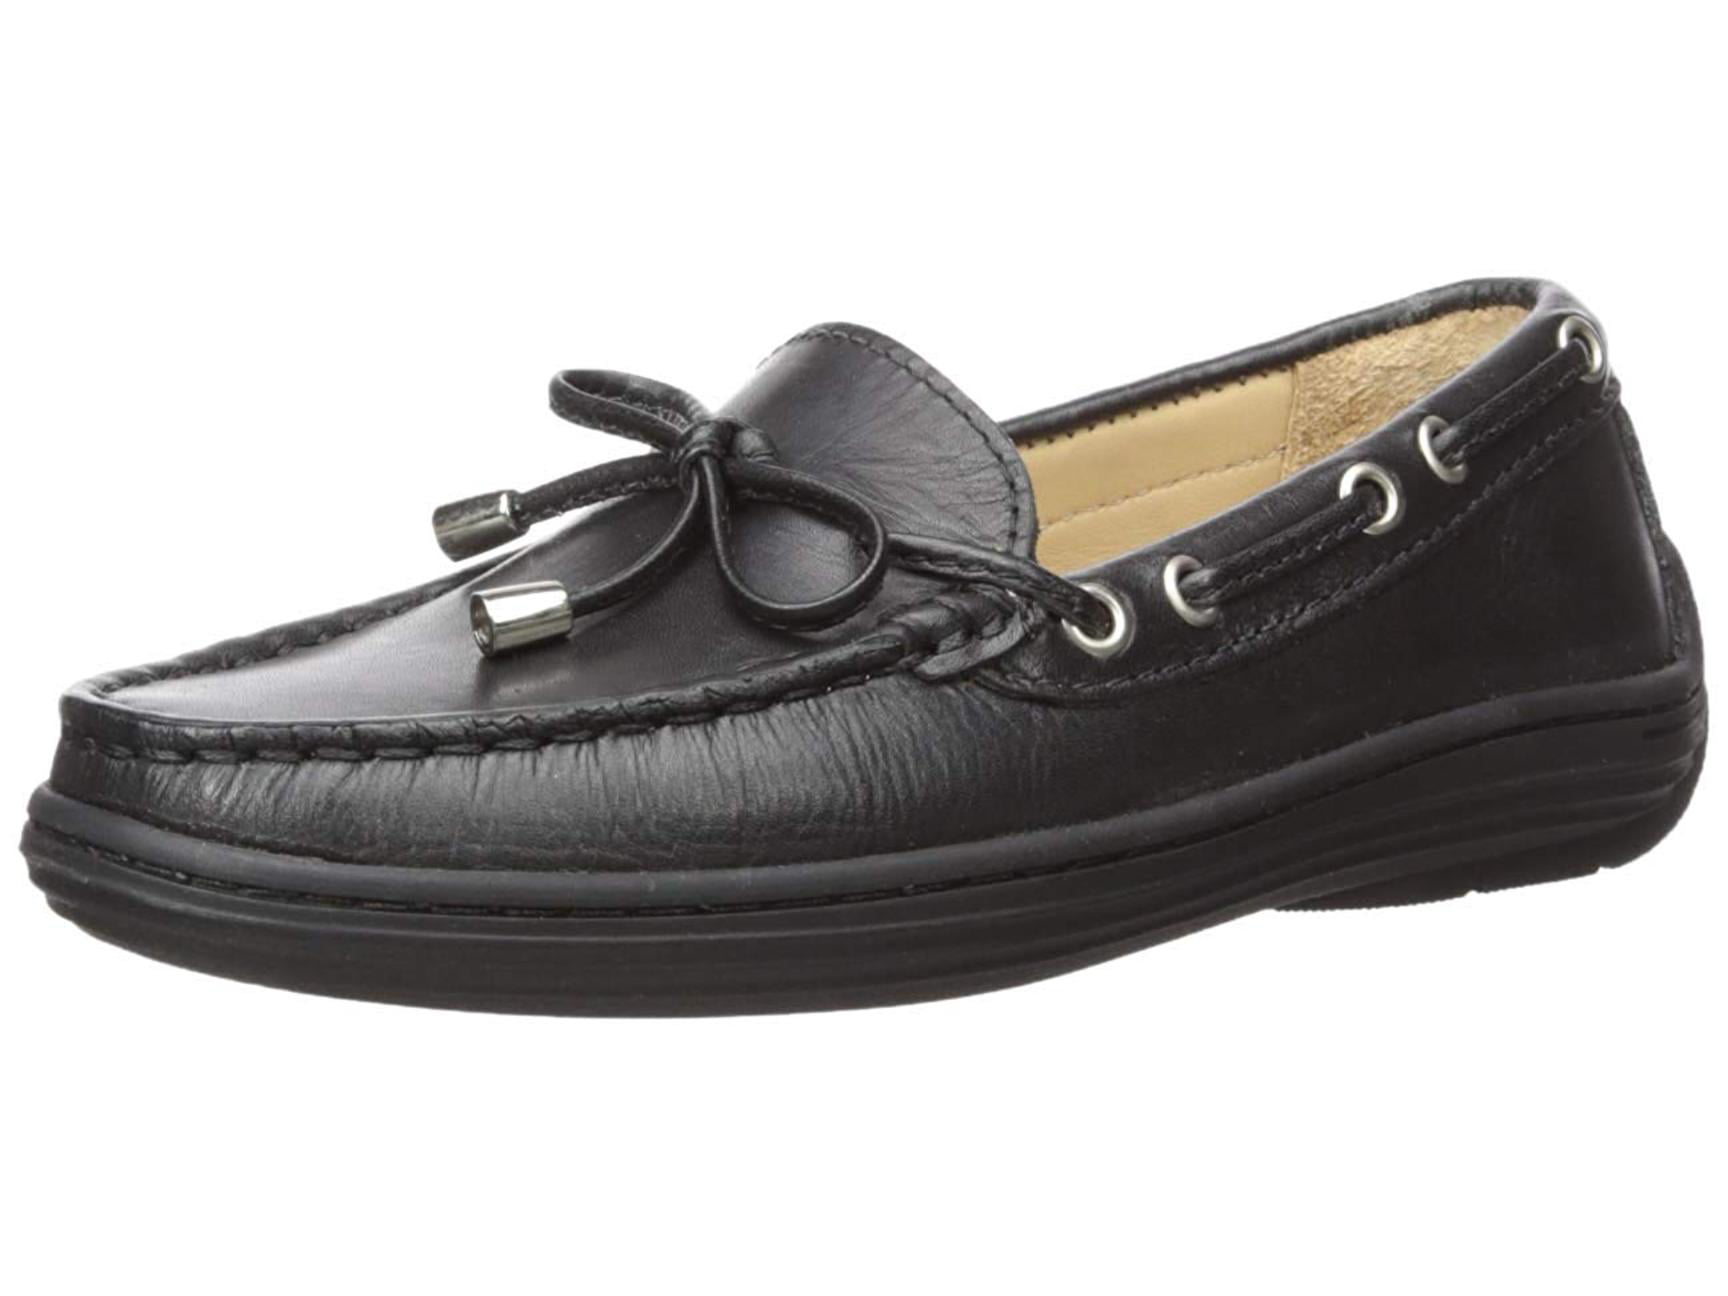 Driver Club USA Unisex-Child Kids Boys/Girls Leather Venetian Driving Style Loafer 